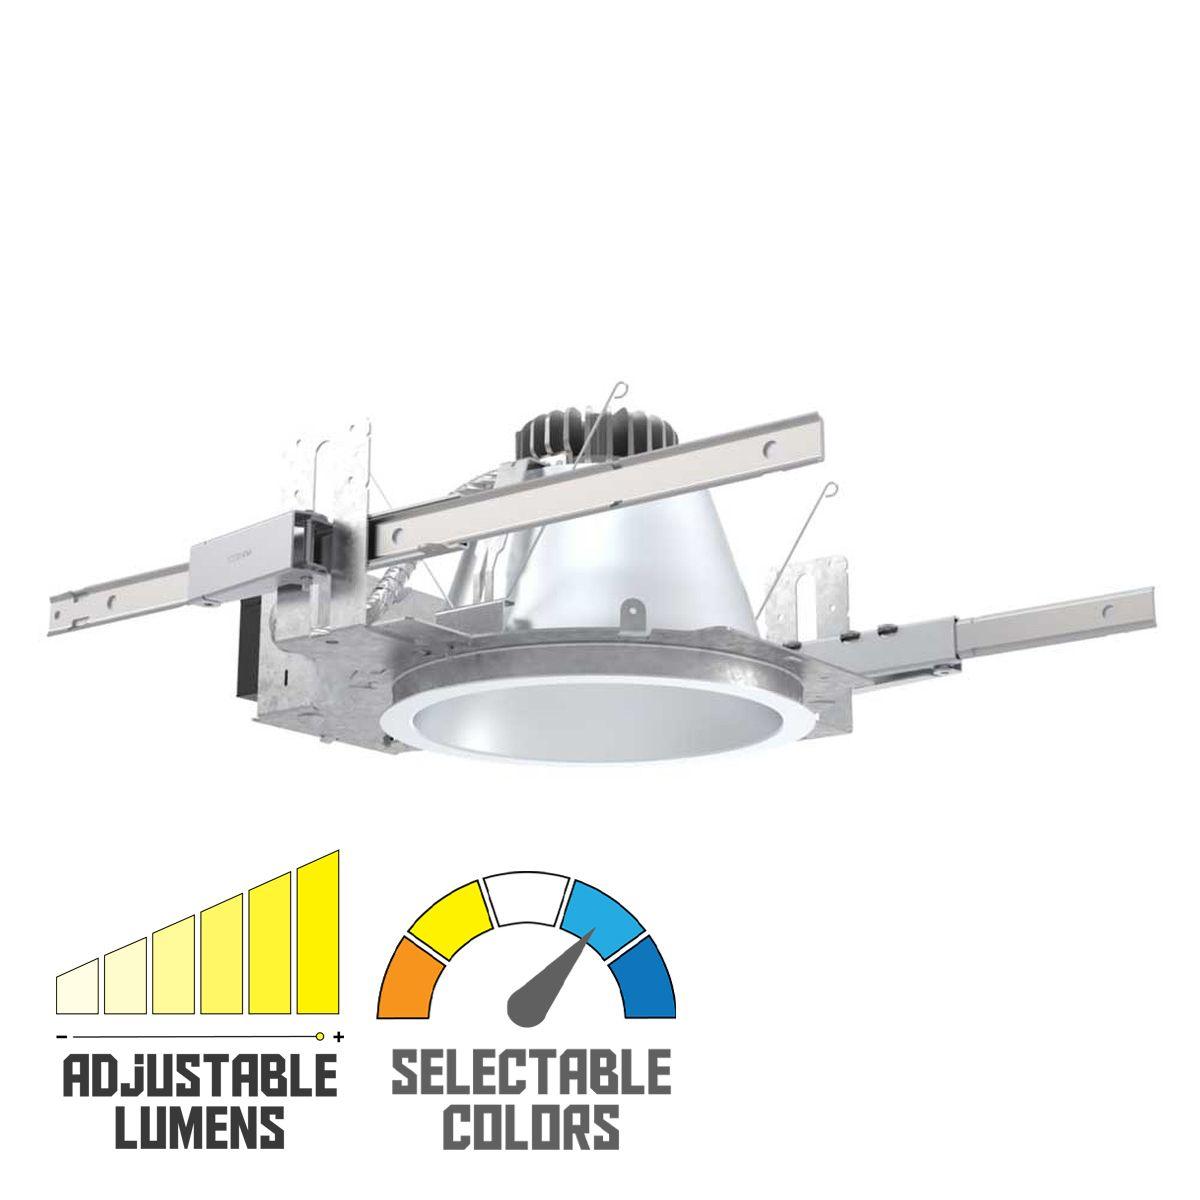 Lithonia LDN8 Commercial LED Recessed Downlight, 3800 Lumens Adjustable, Selectable CCT, 30K/35K/40K/50K (Reflector Sold Separately)